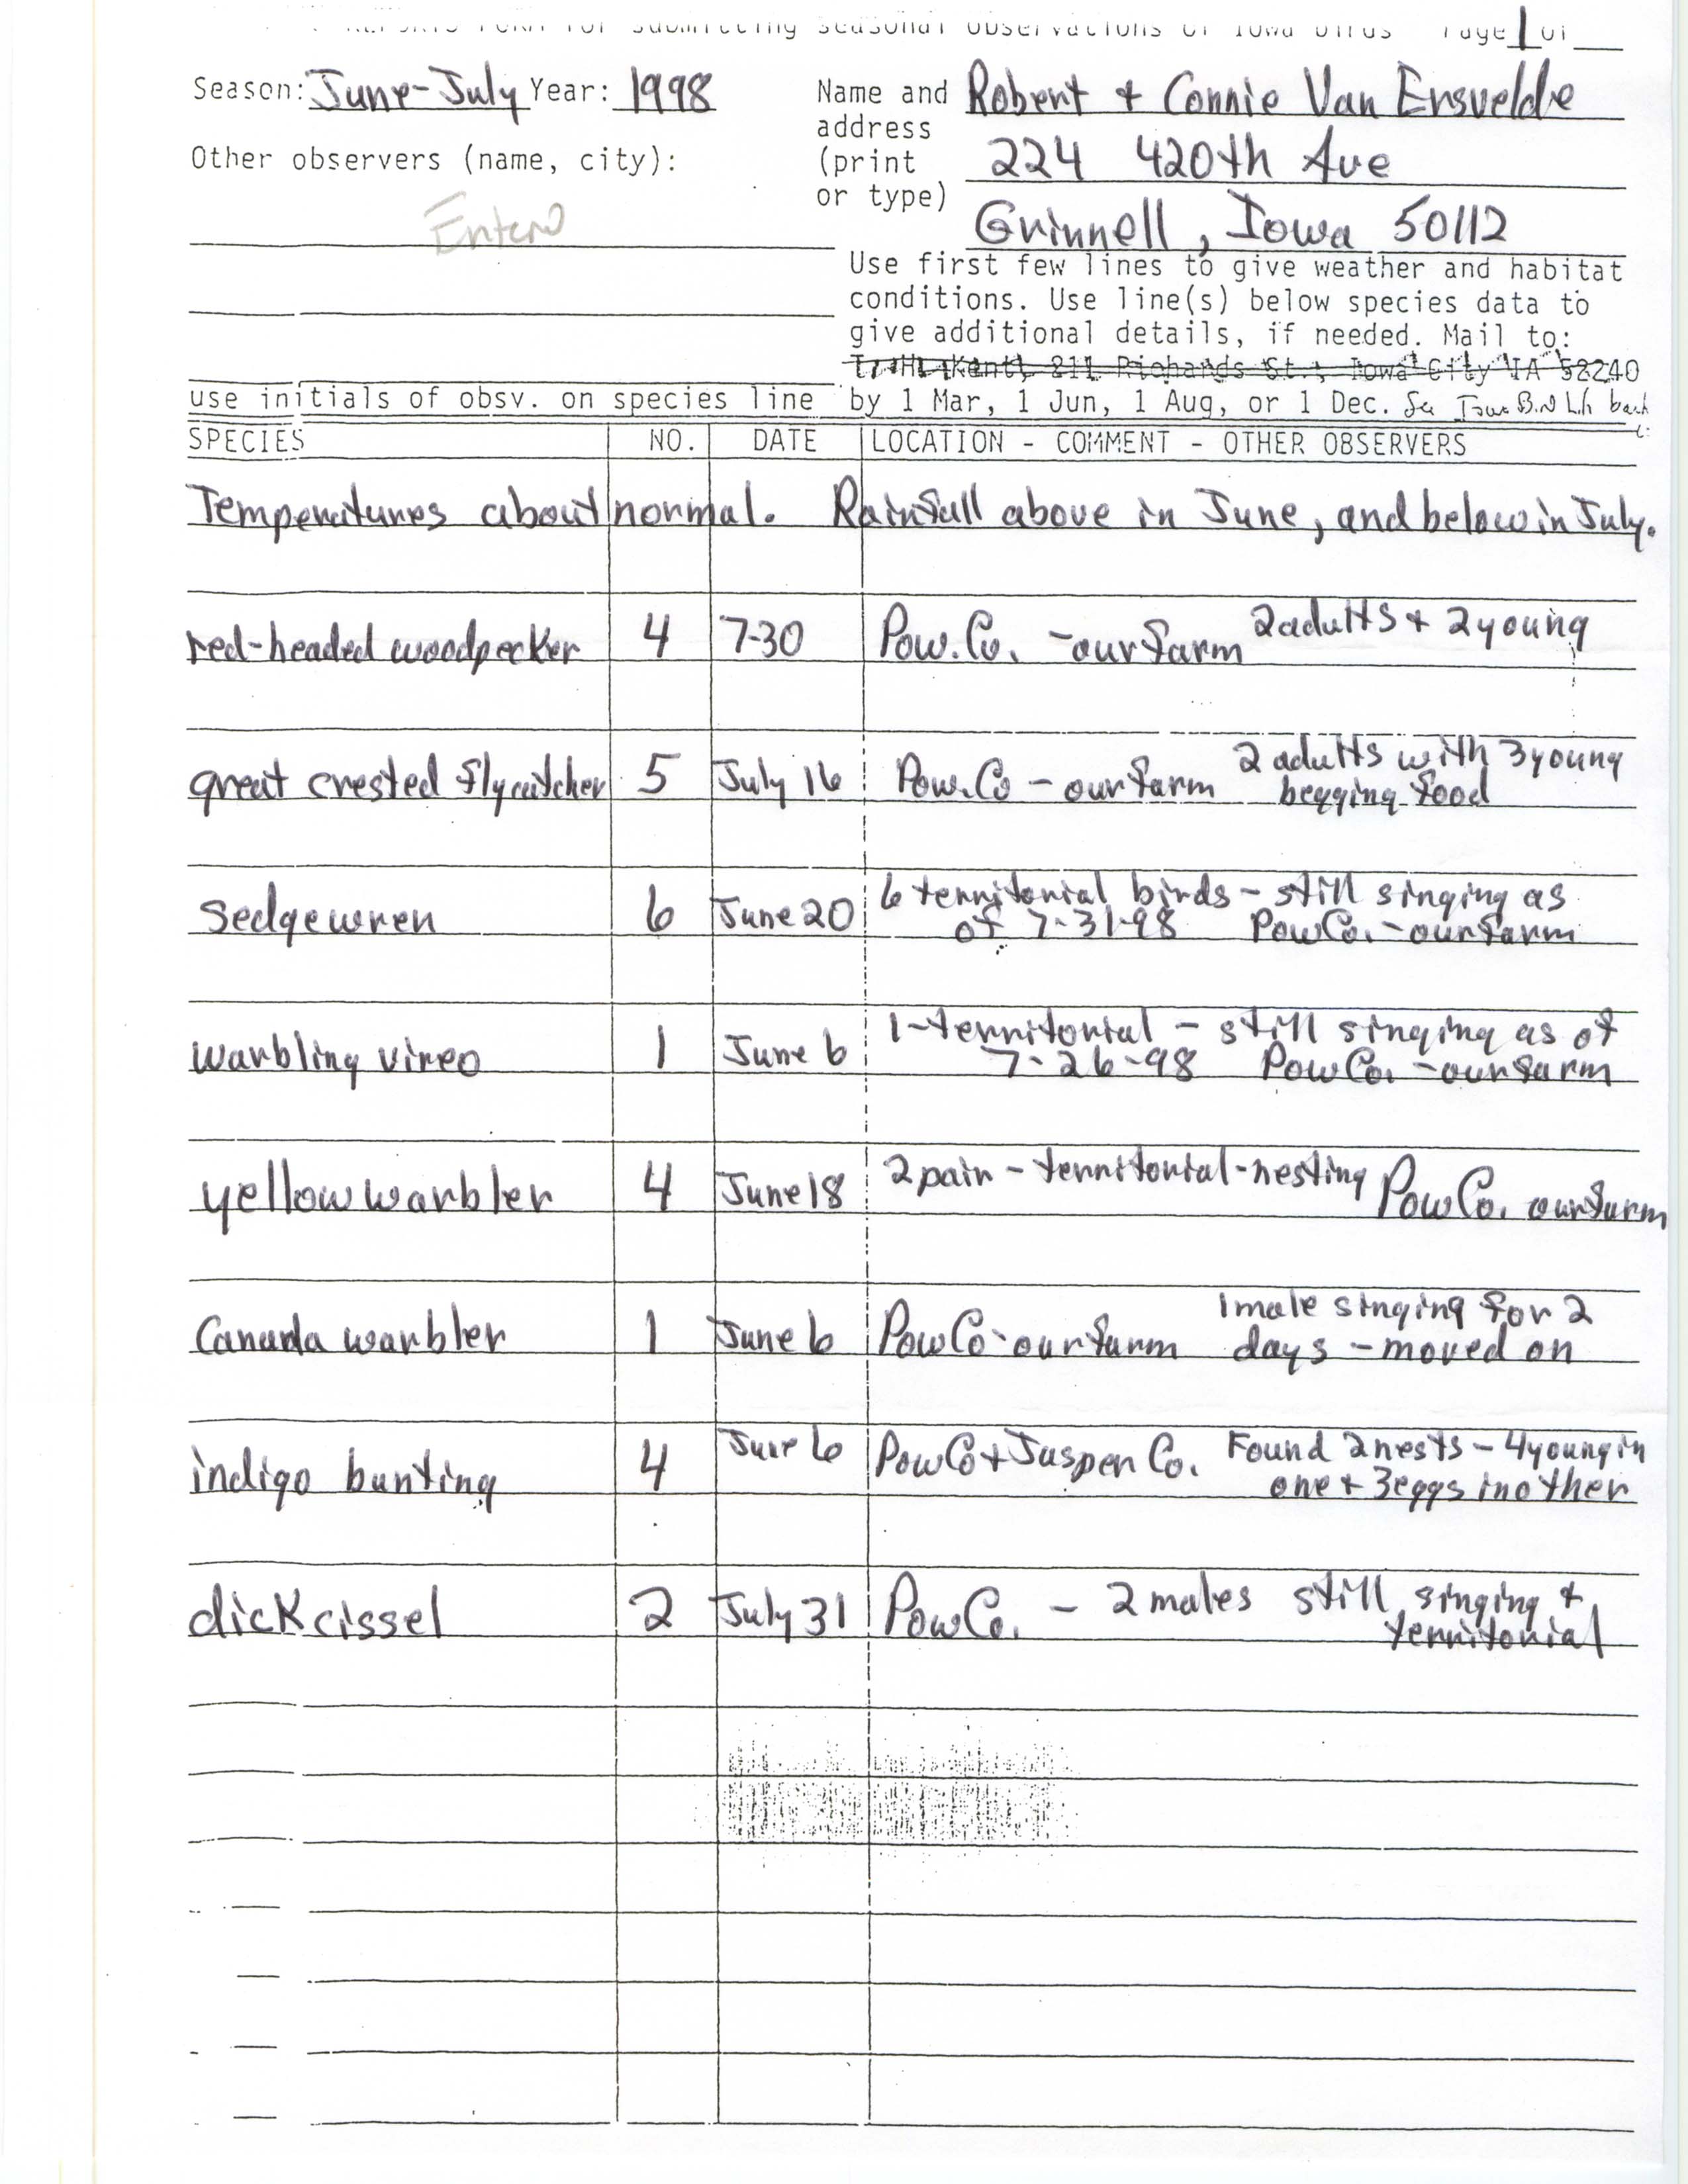 Field reports form for submitting seasonal observations of Iowa birds, Robert & Connie VanErsvelde, June-July 1998